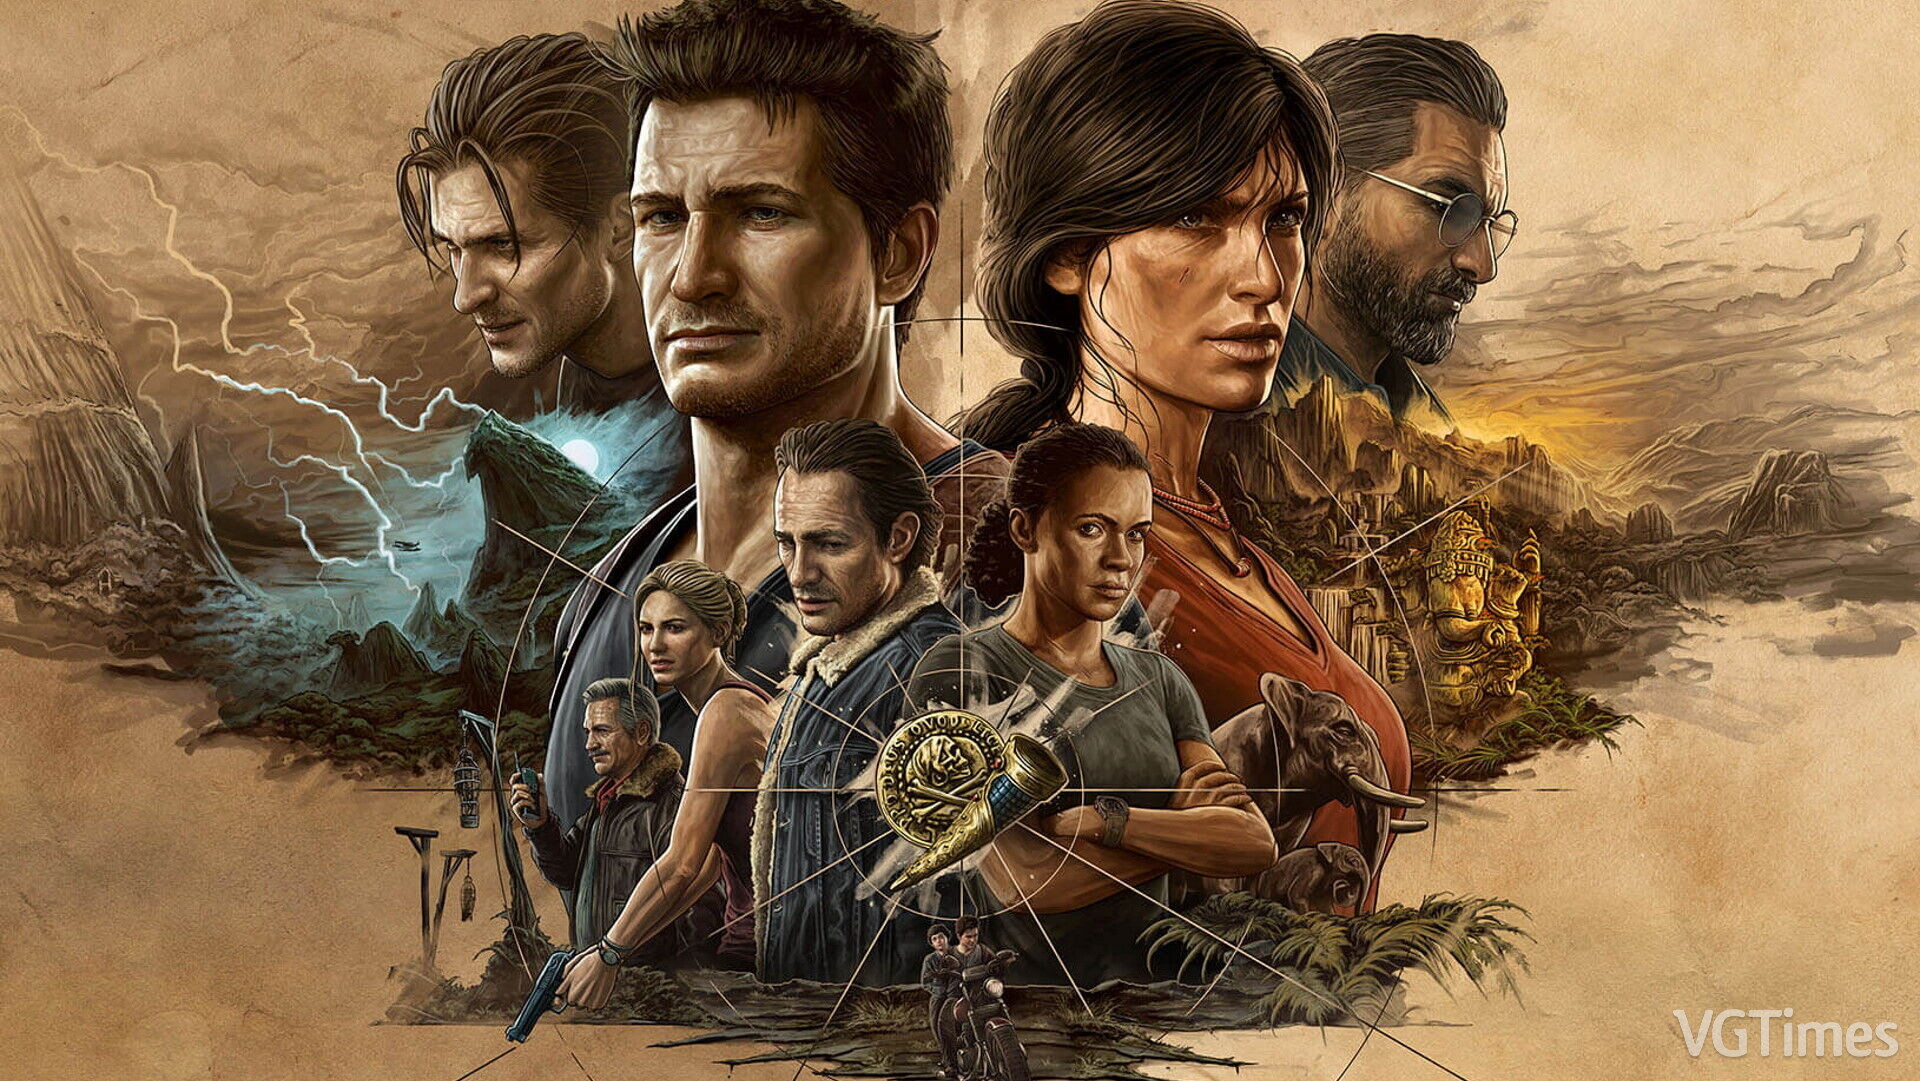 Uncharted: Legacy of Thieves Collection GAME TRAINER v1.3 +5